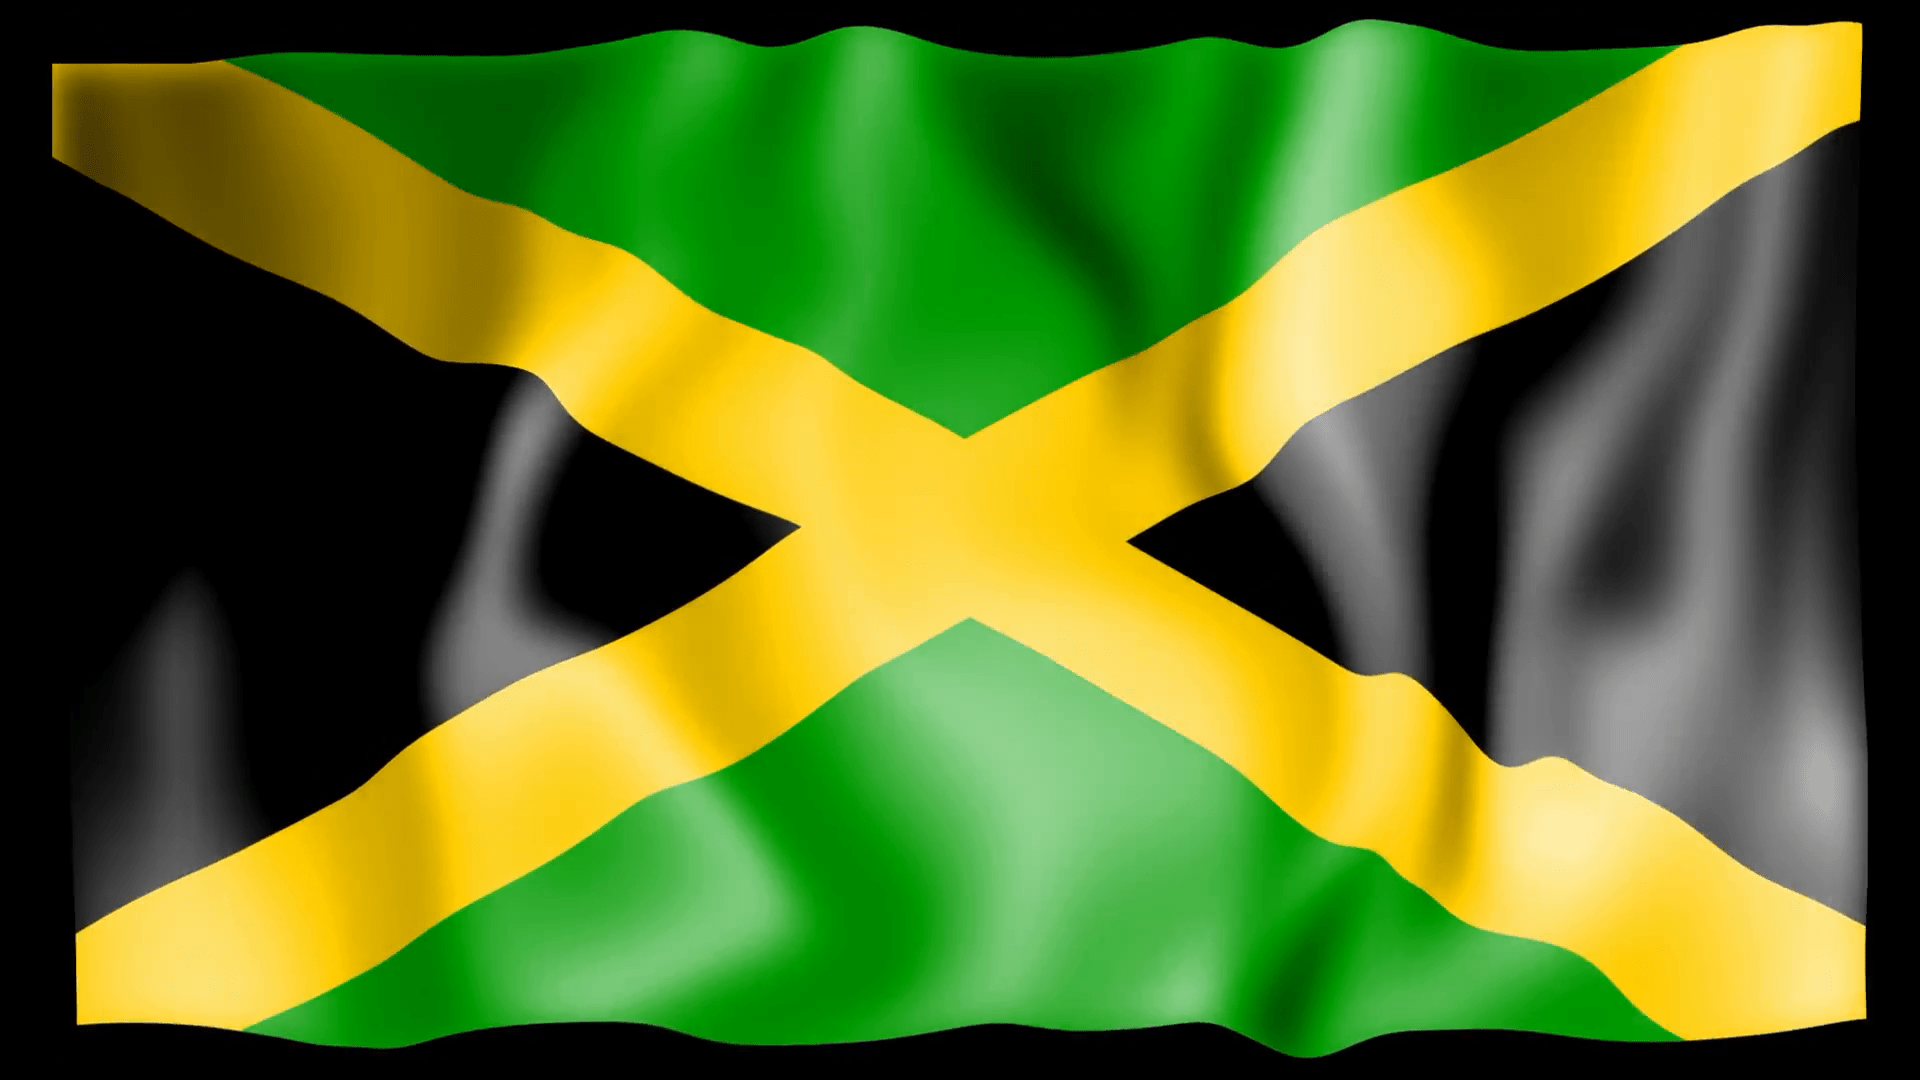 82 Jamaica Flag Wallpaper Stock Video Footage  4K and HD Video Clips   Shutterstock